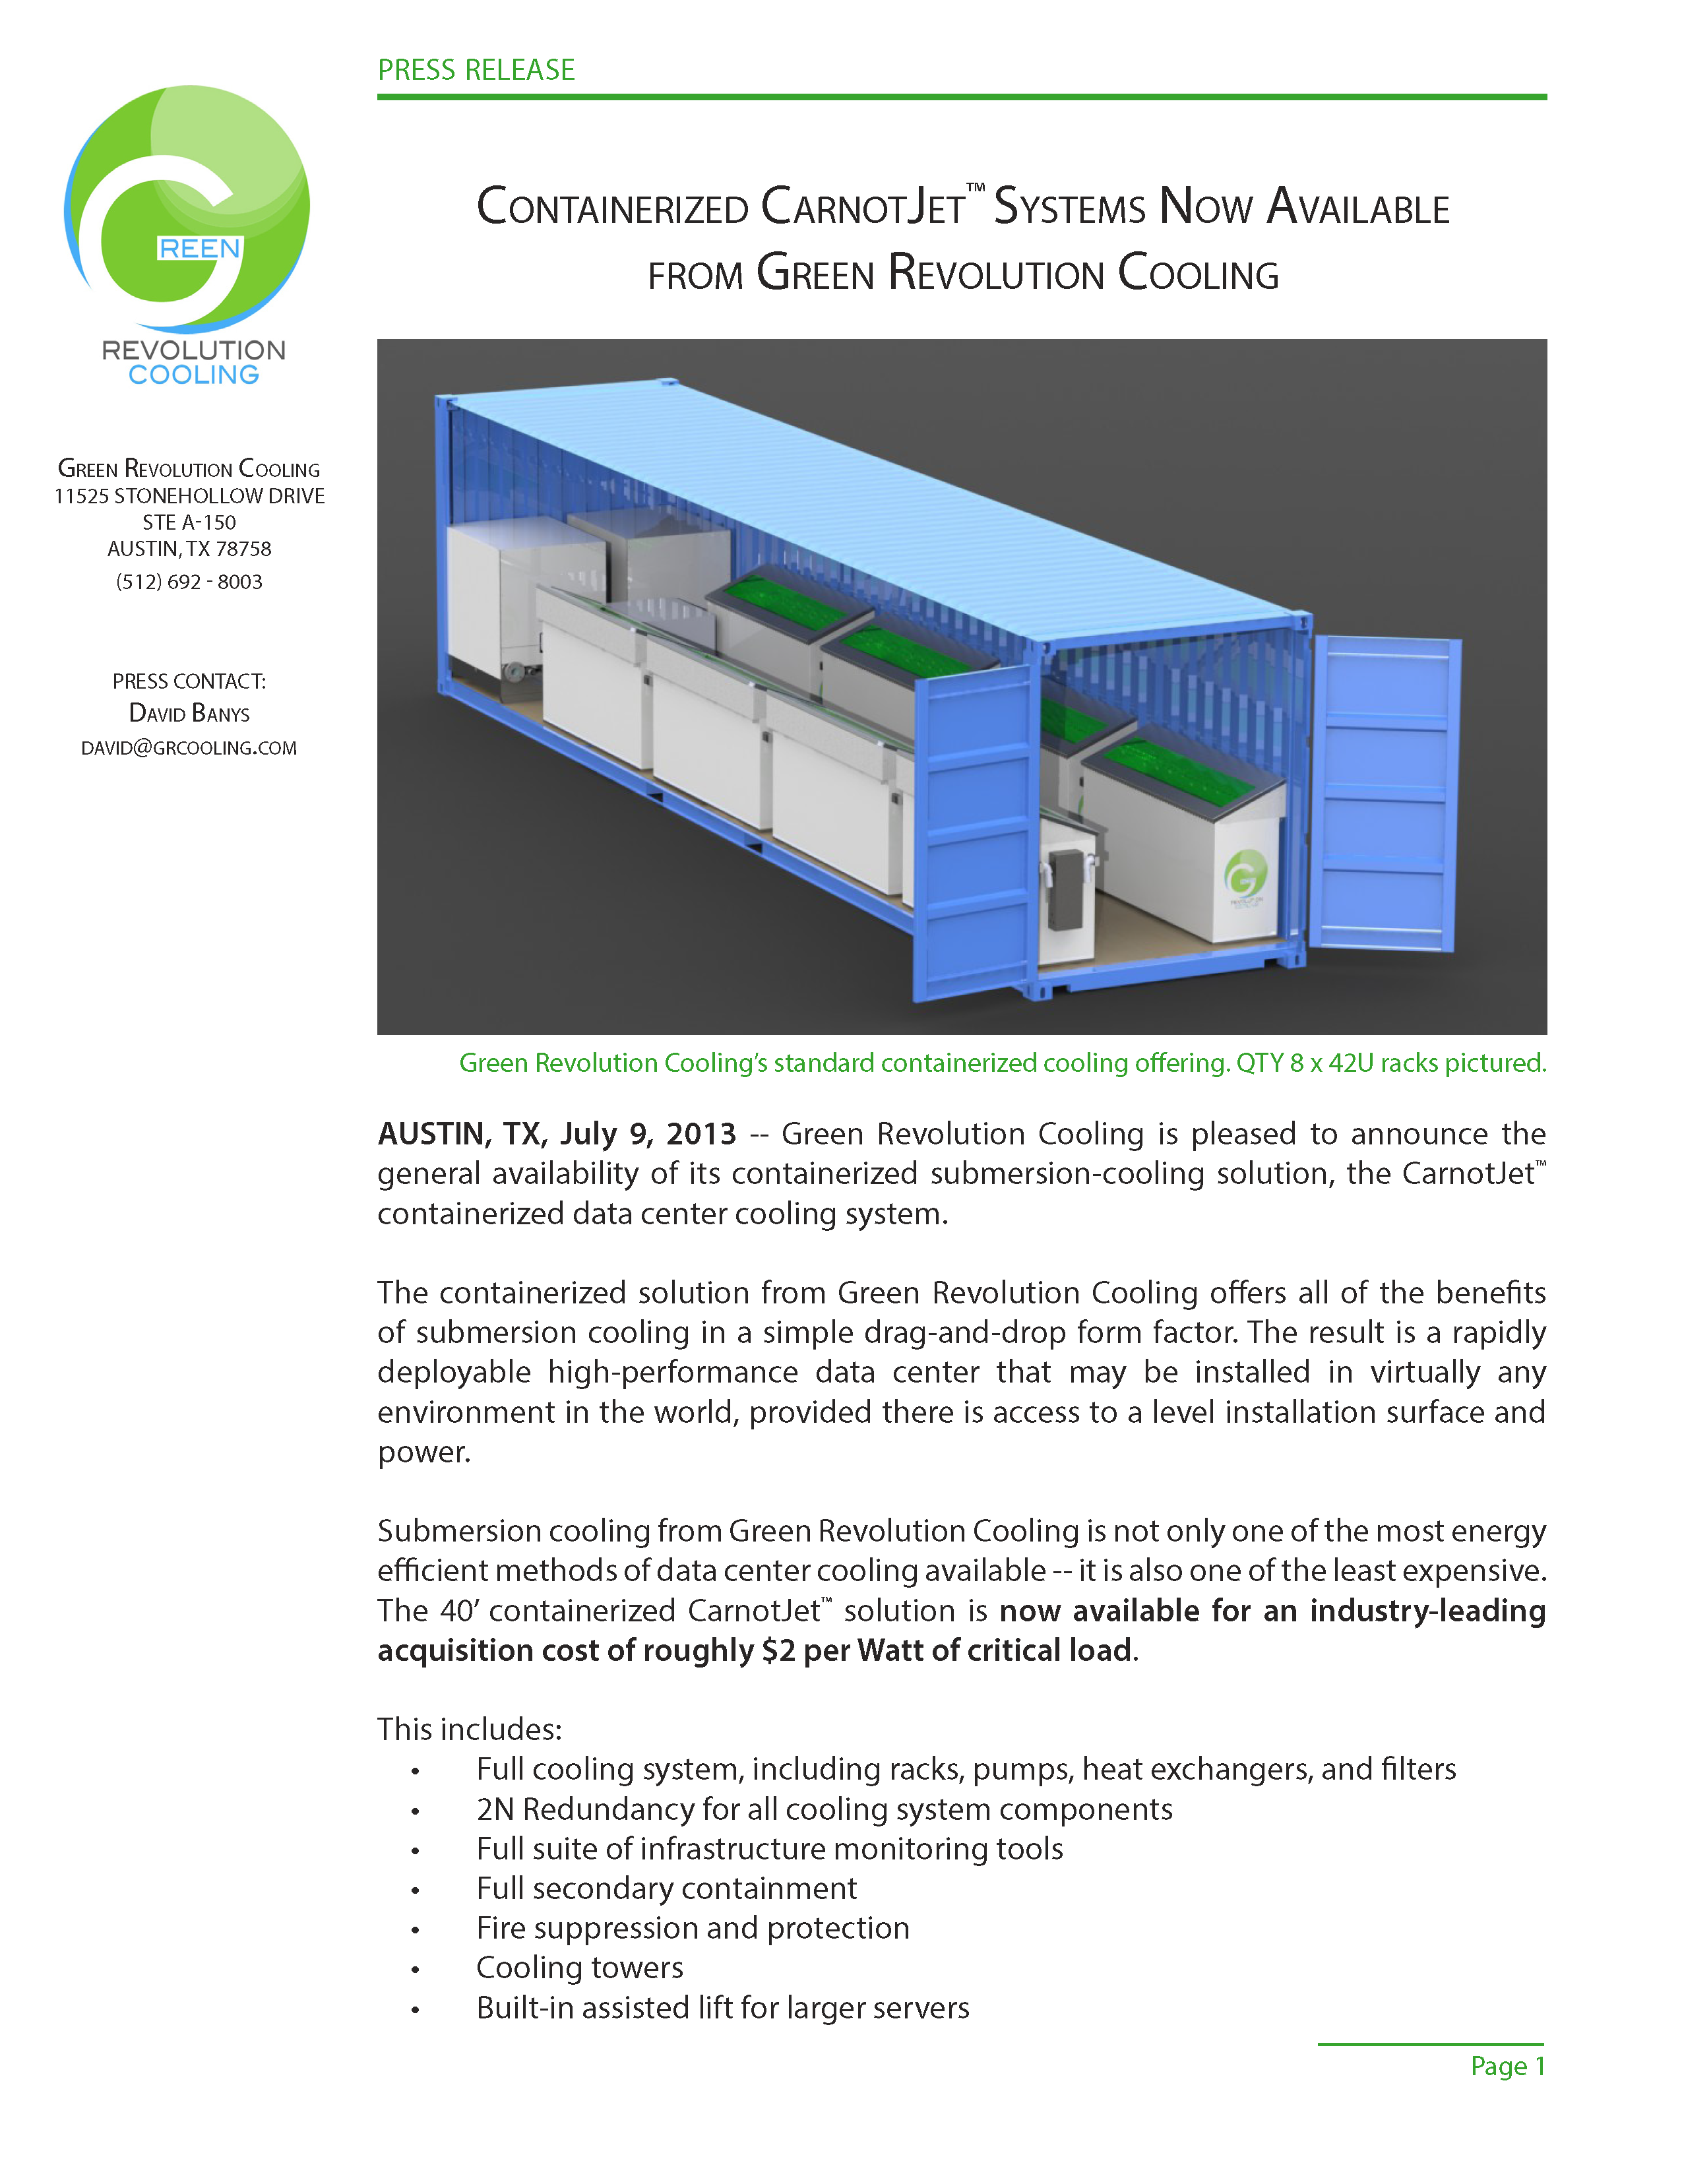 Containerized CarnotJet Systems Now Available from Green Revolution Cooling